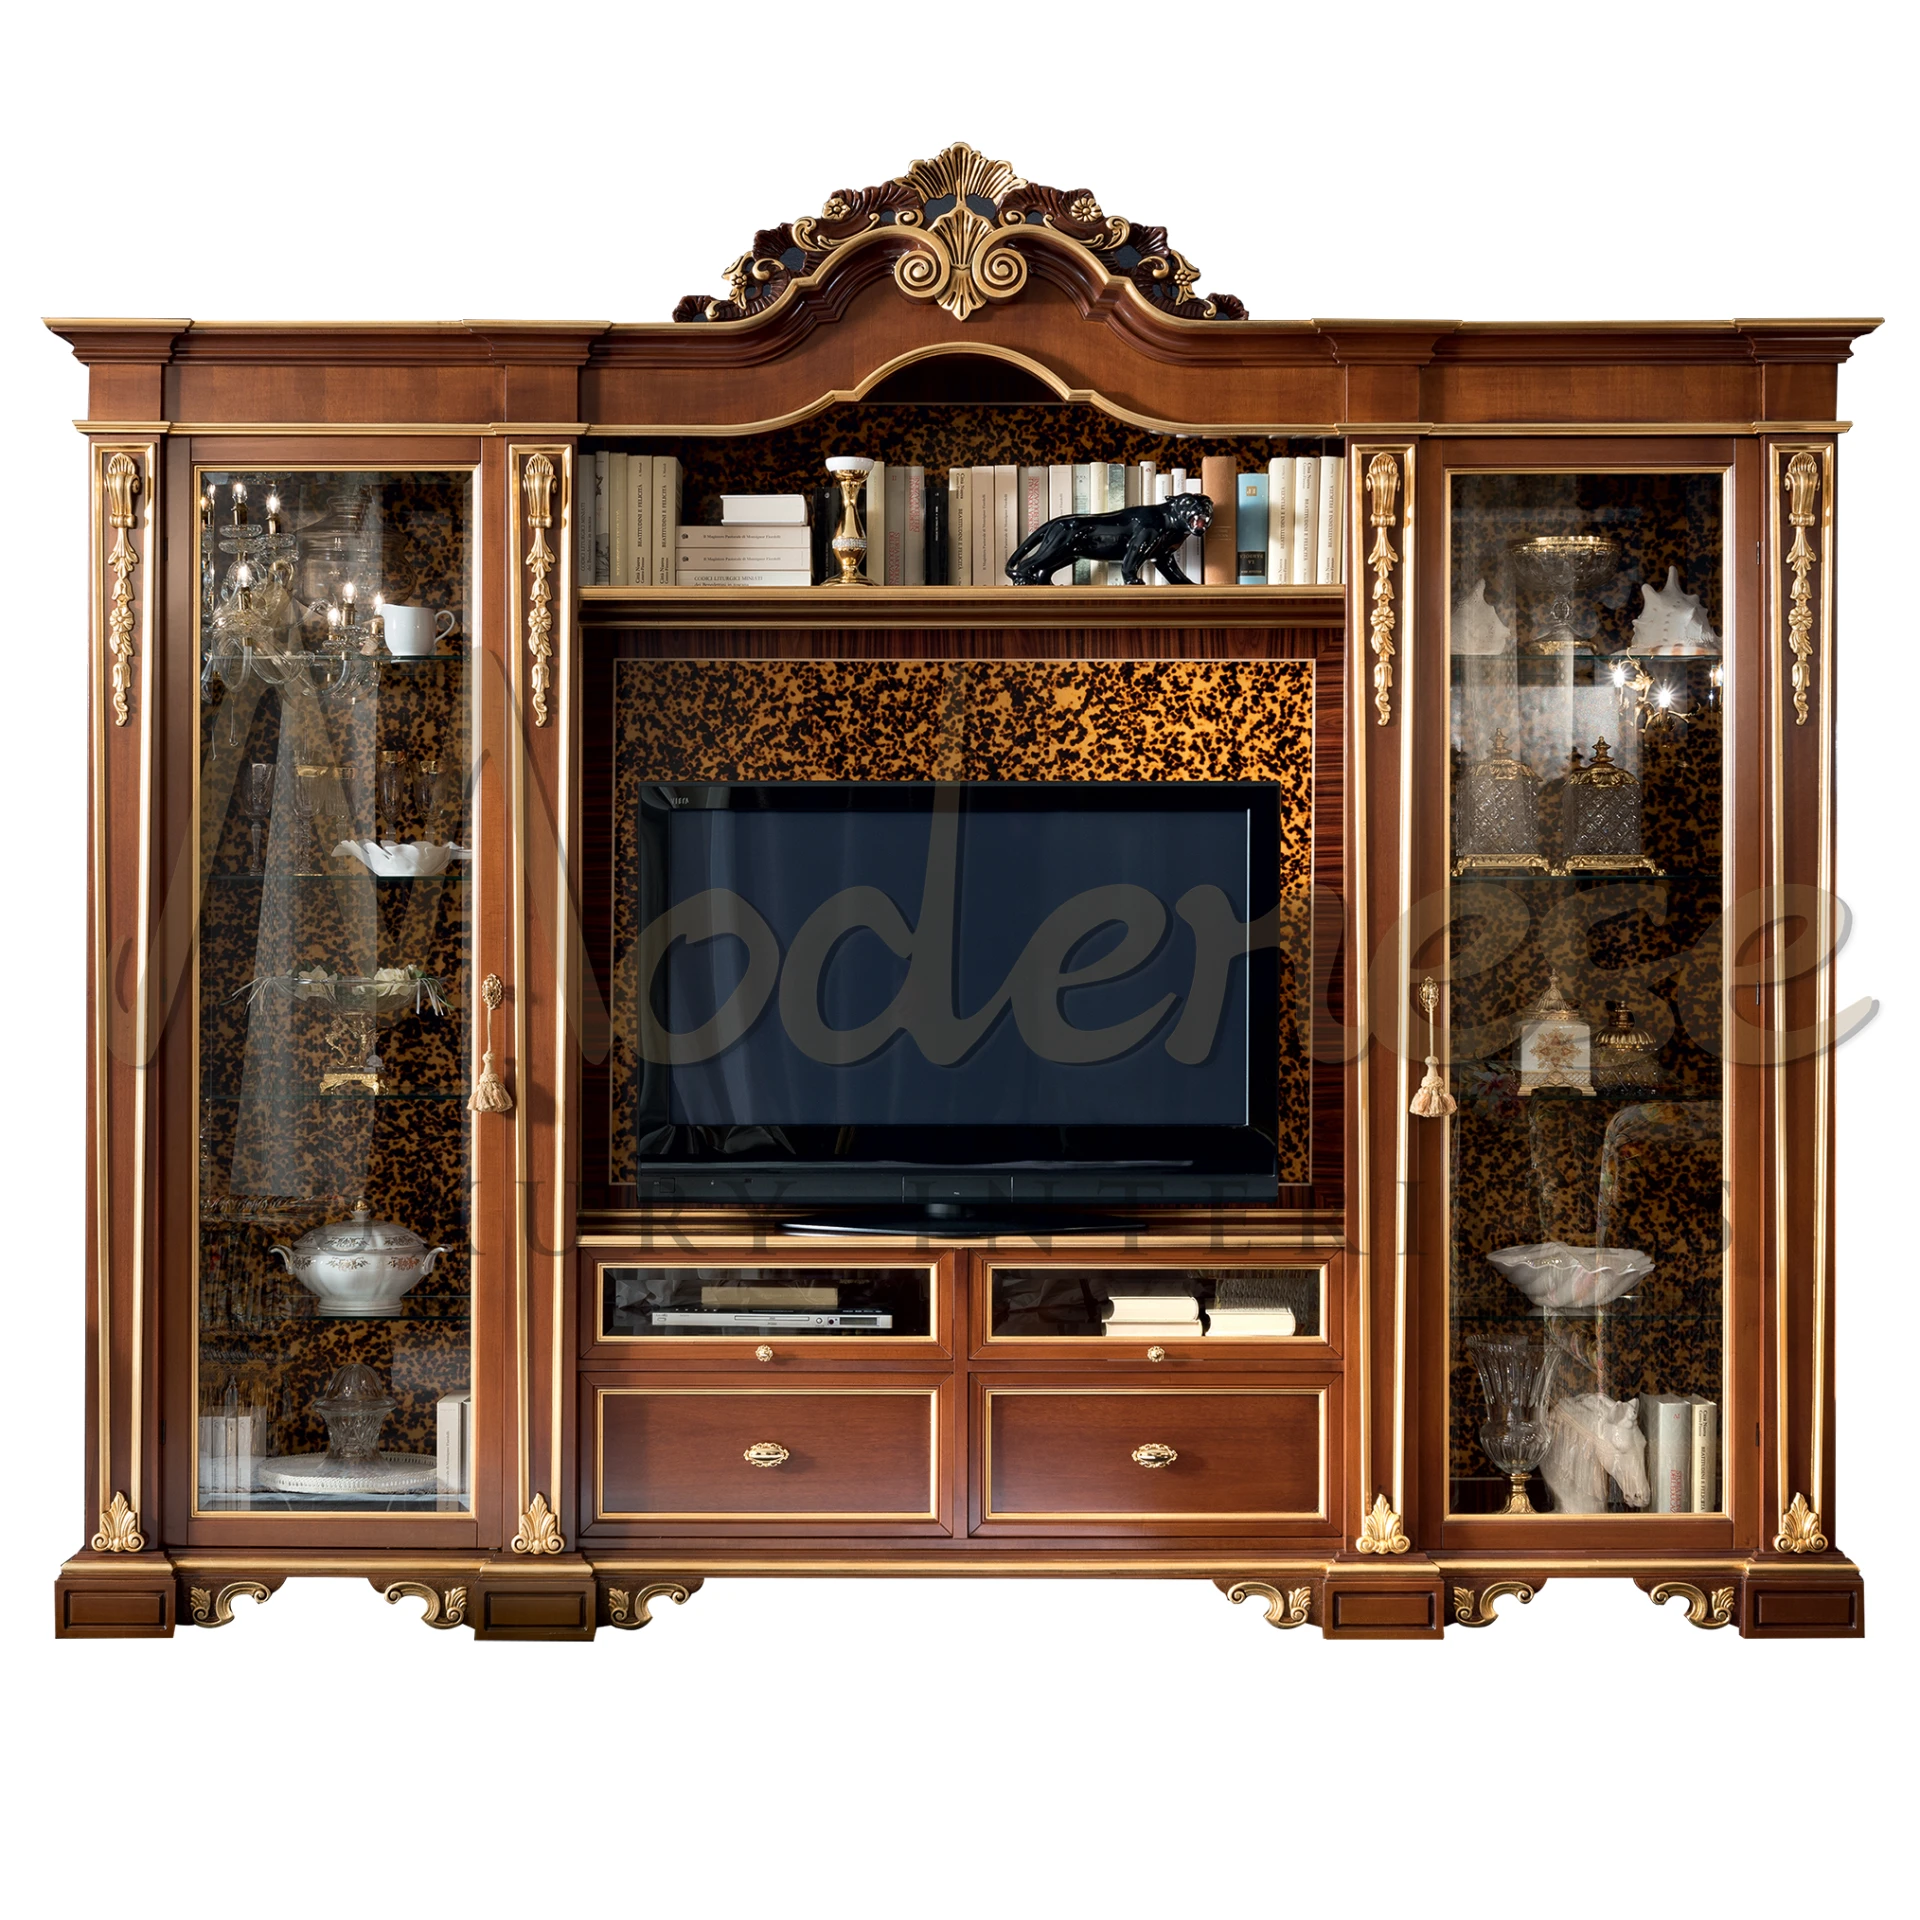 Elegant dark brown solid wood TV cabinet in mahogany, perfect for luxury interiors seeking warmth and classic design.